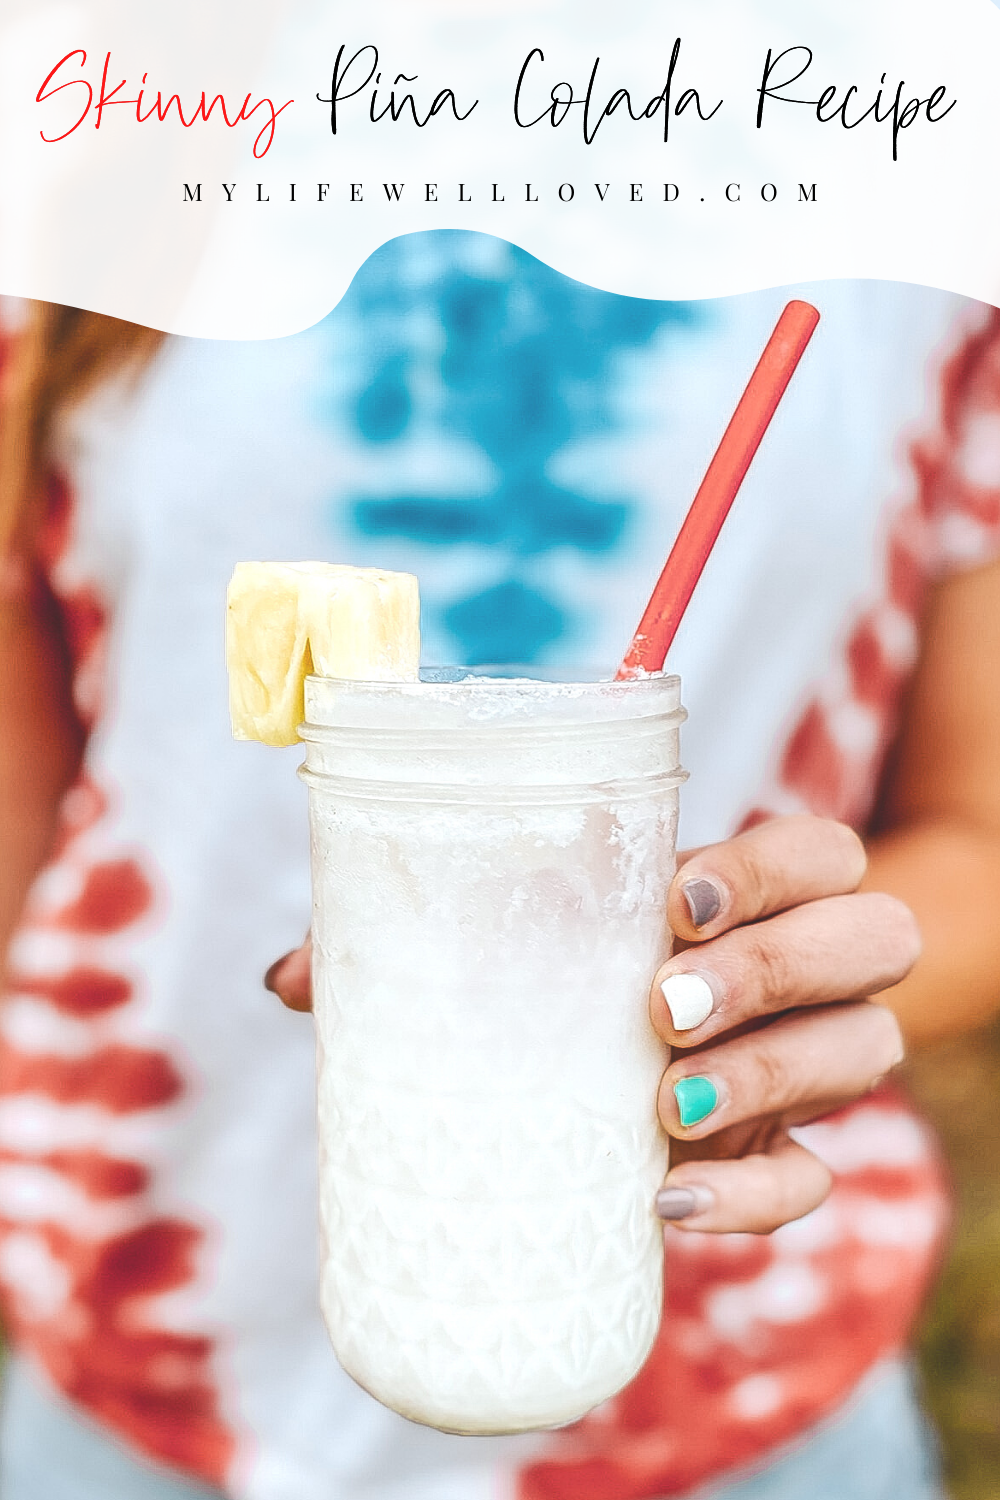 Food + lifestyle blogger, My Life Well Loved, shares her Skinny Piña Colada recipe! Click NOW to grab the recipe!